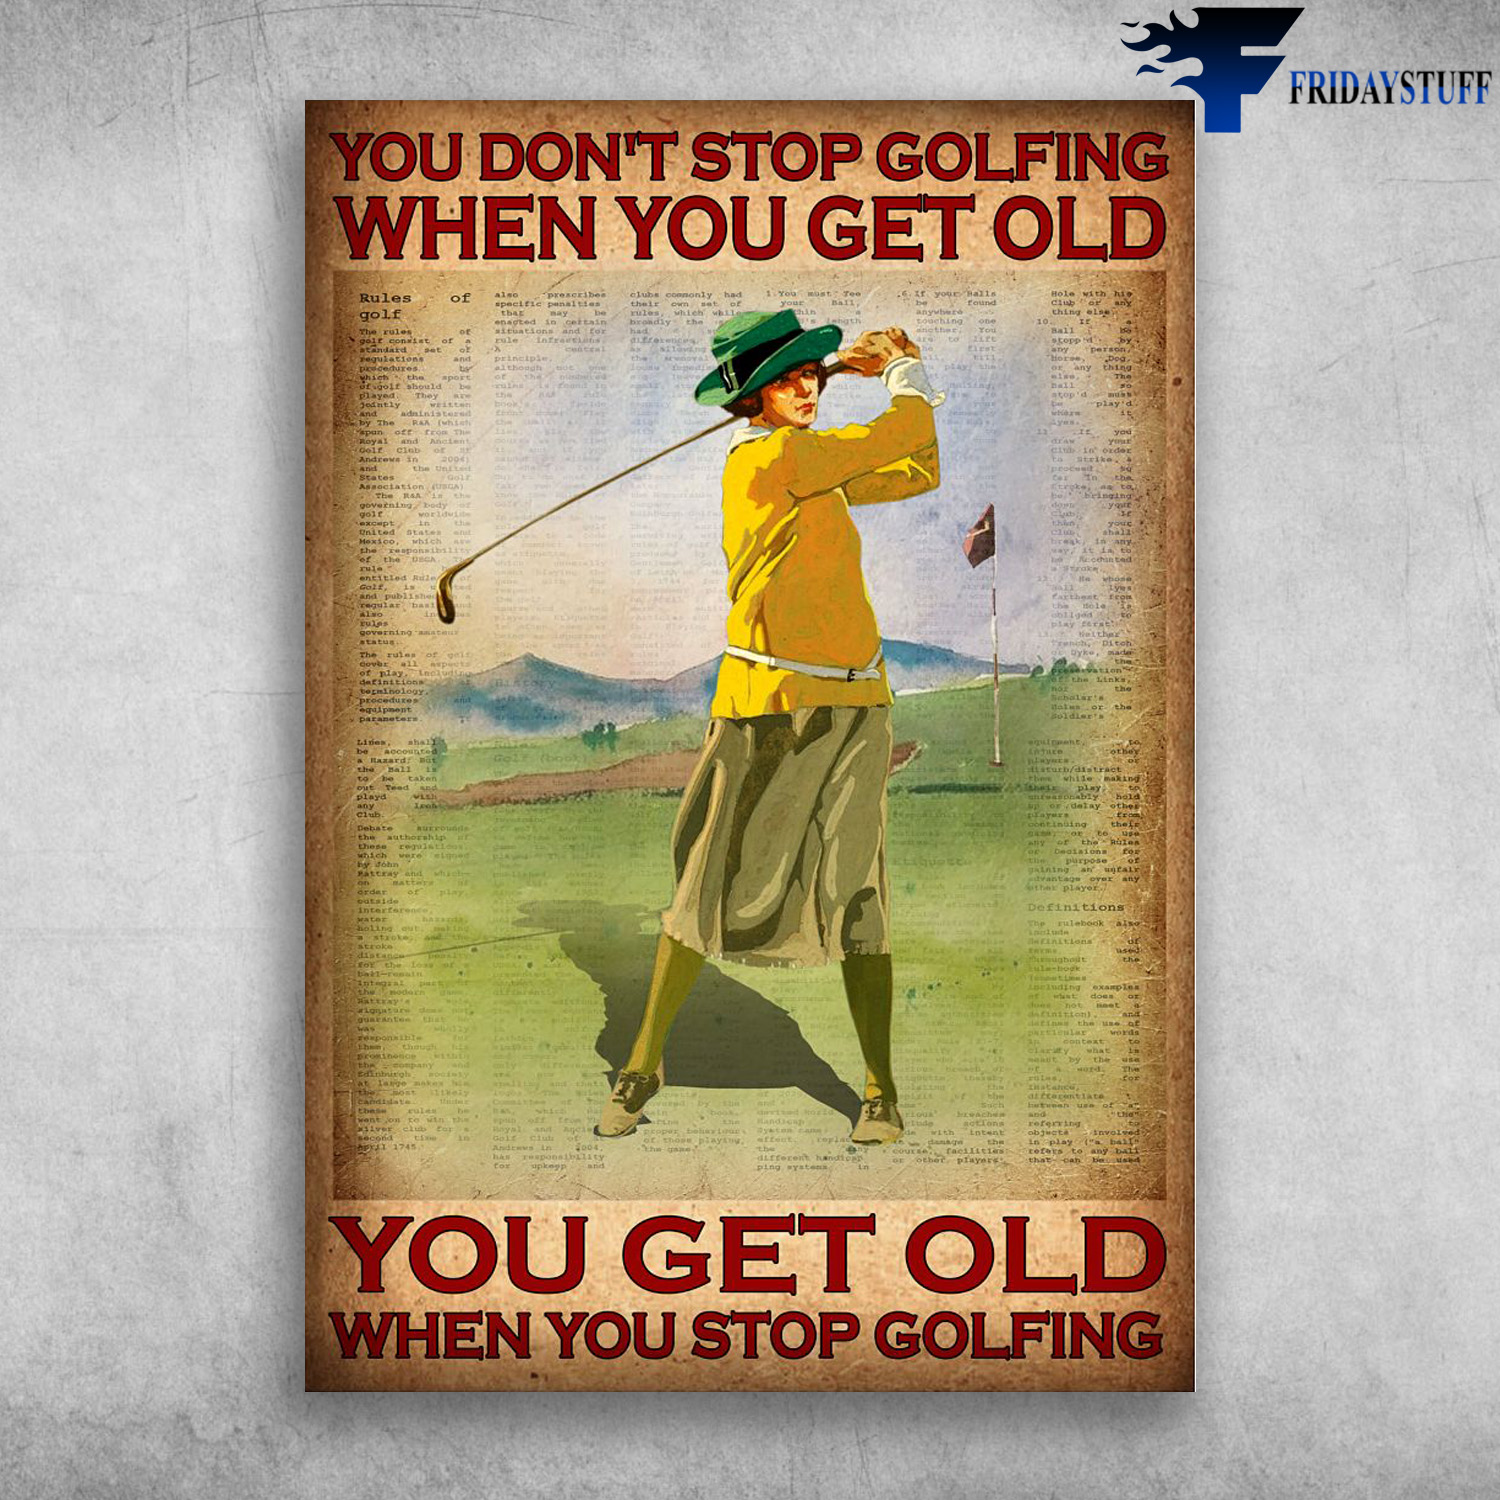 Girl Playing Golf - You Don't Stop Golfing When You Get Old, You Get Old When You Stop Golfing